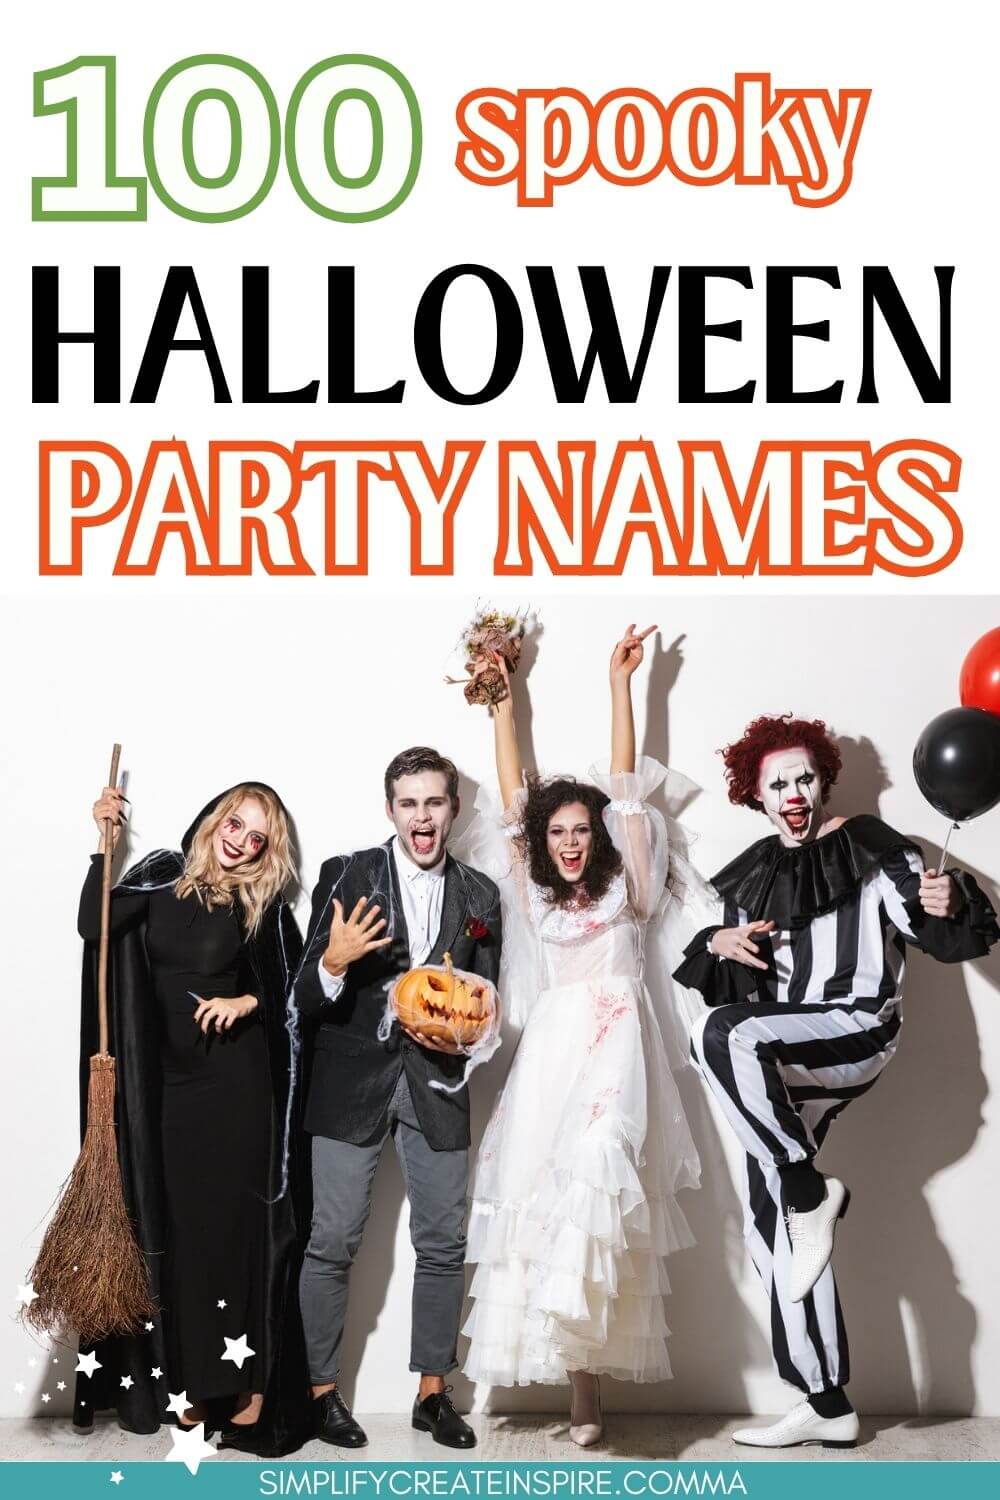 100 spooky halloween party names